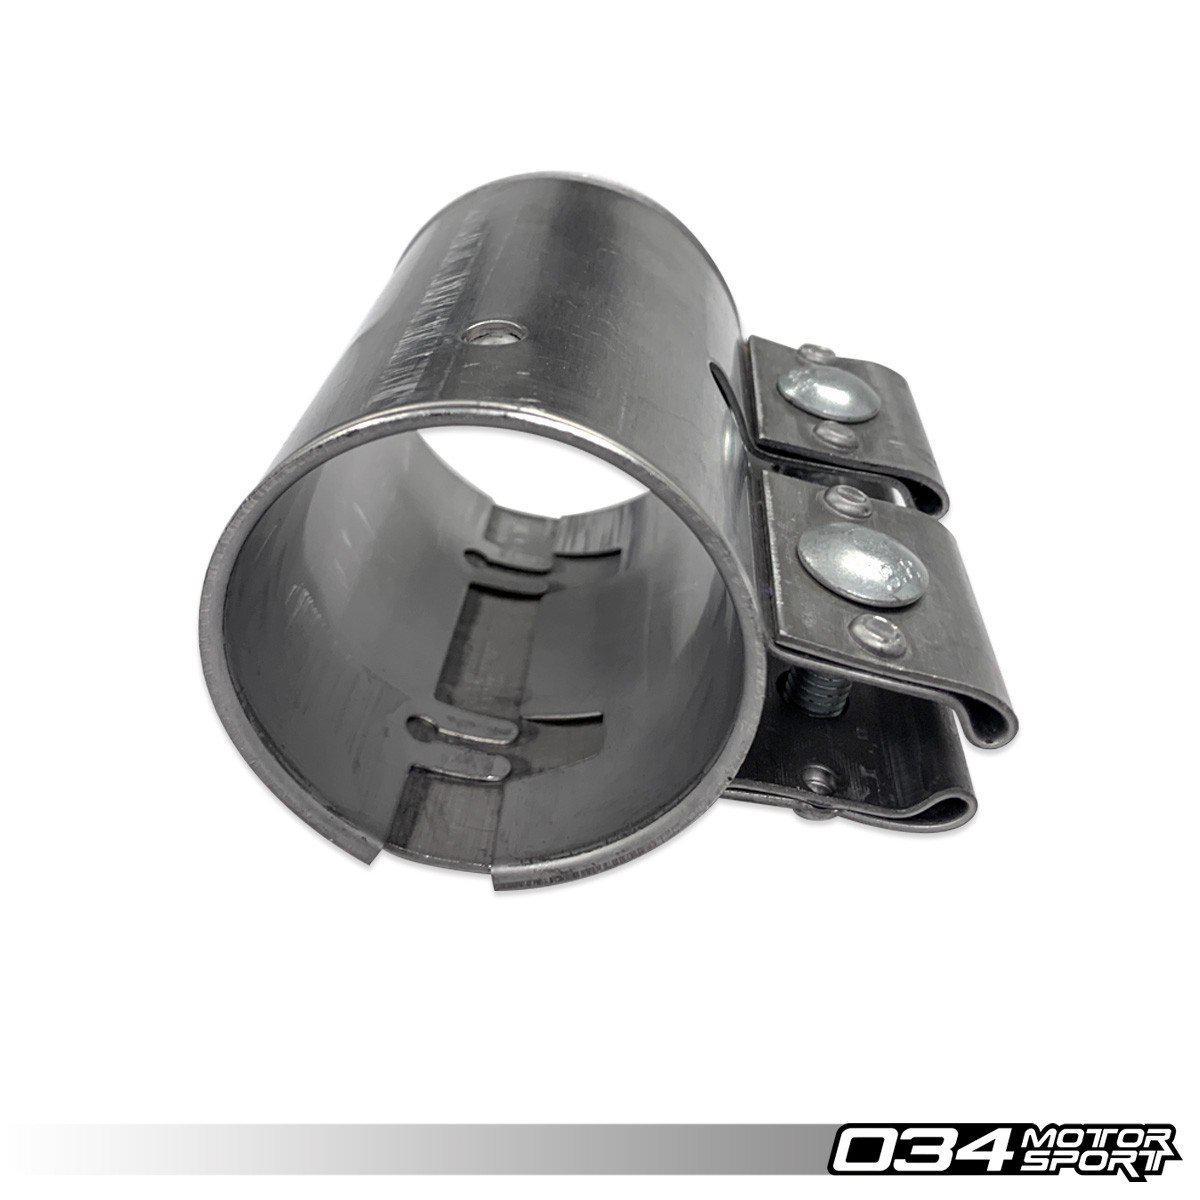 65mm Exhaust Clamp For Audi 8V A3, B9 A4/A5/Allroad, And Vw MKVII GTI-A Little Tuning Co